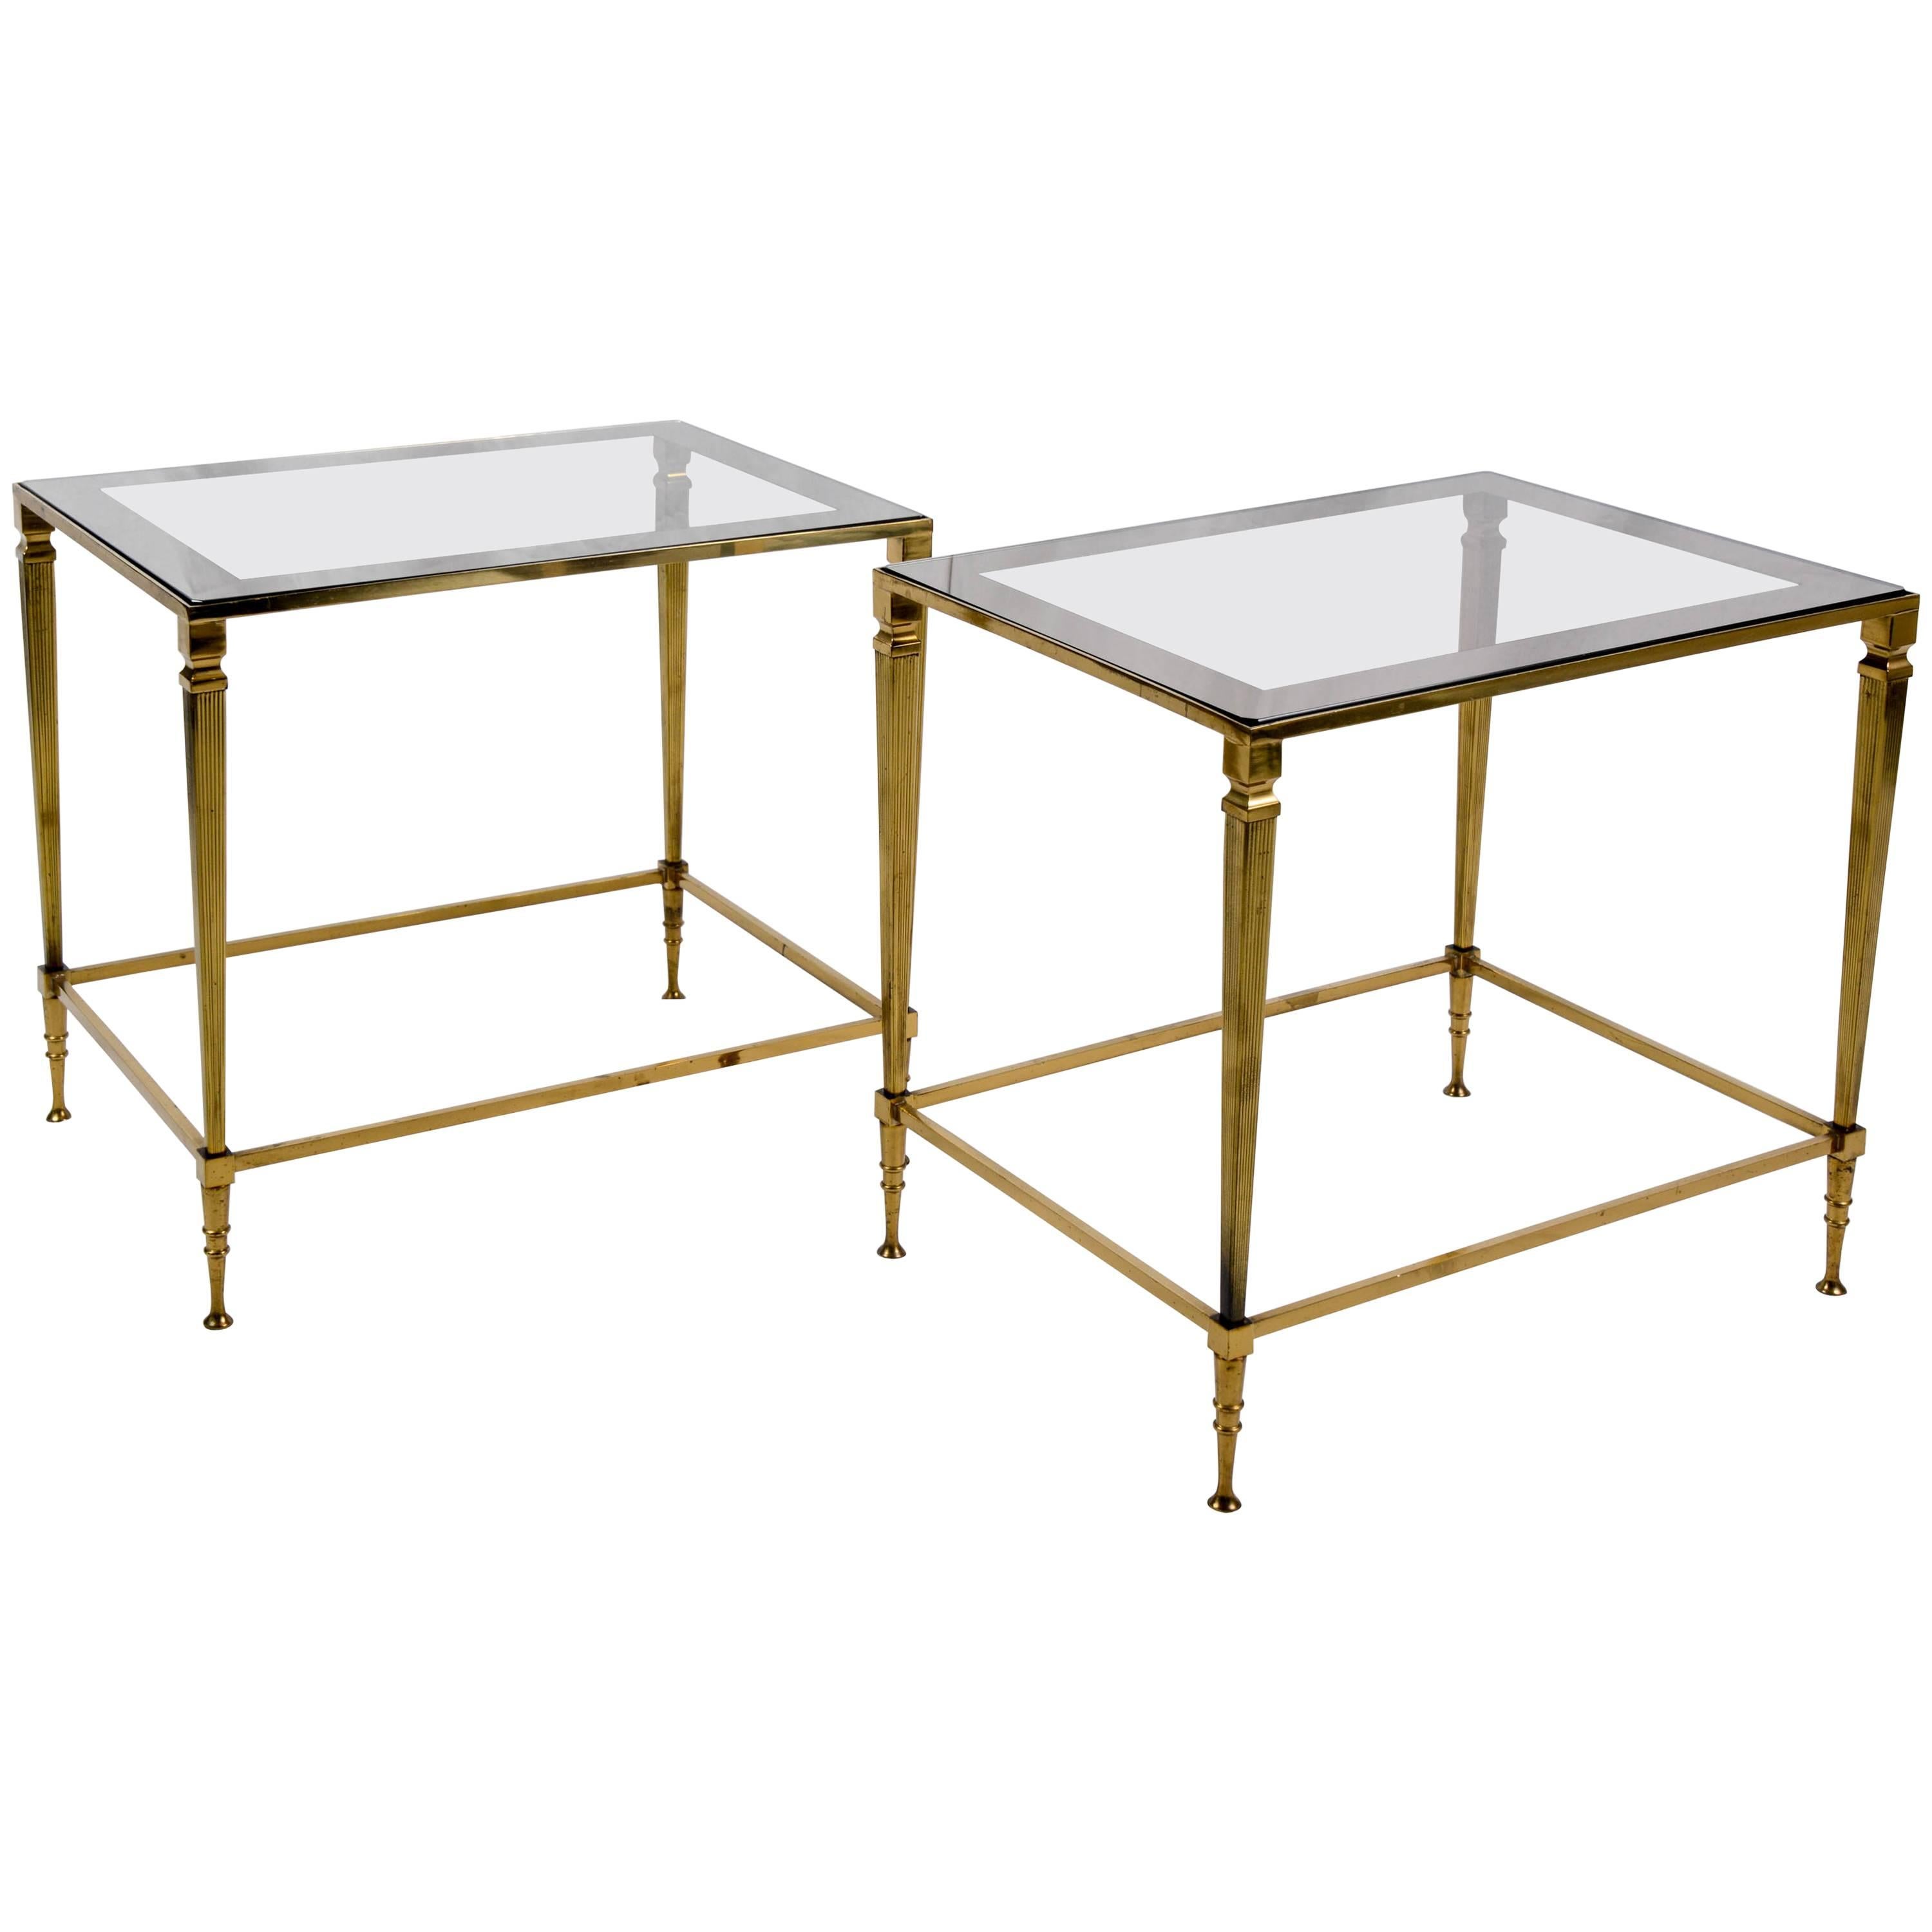 Pair of End Table in Brass and Original Top Mirrors, France, 1960 For Sale